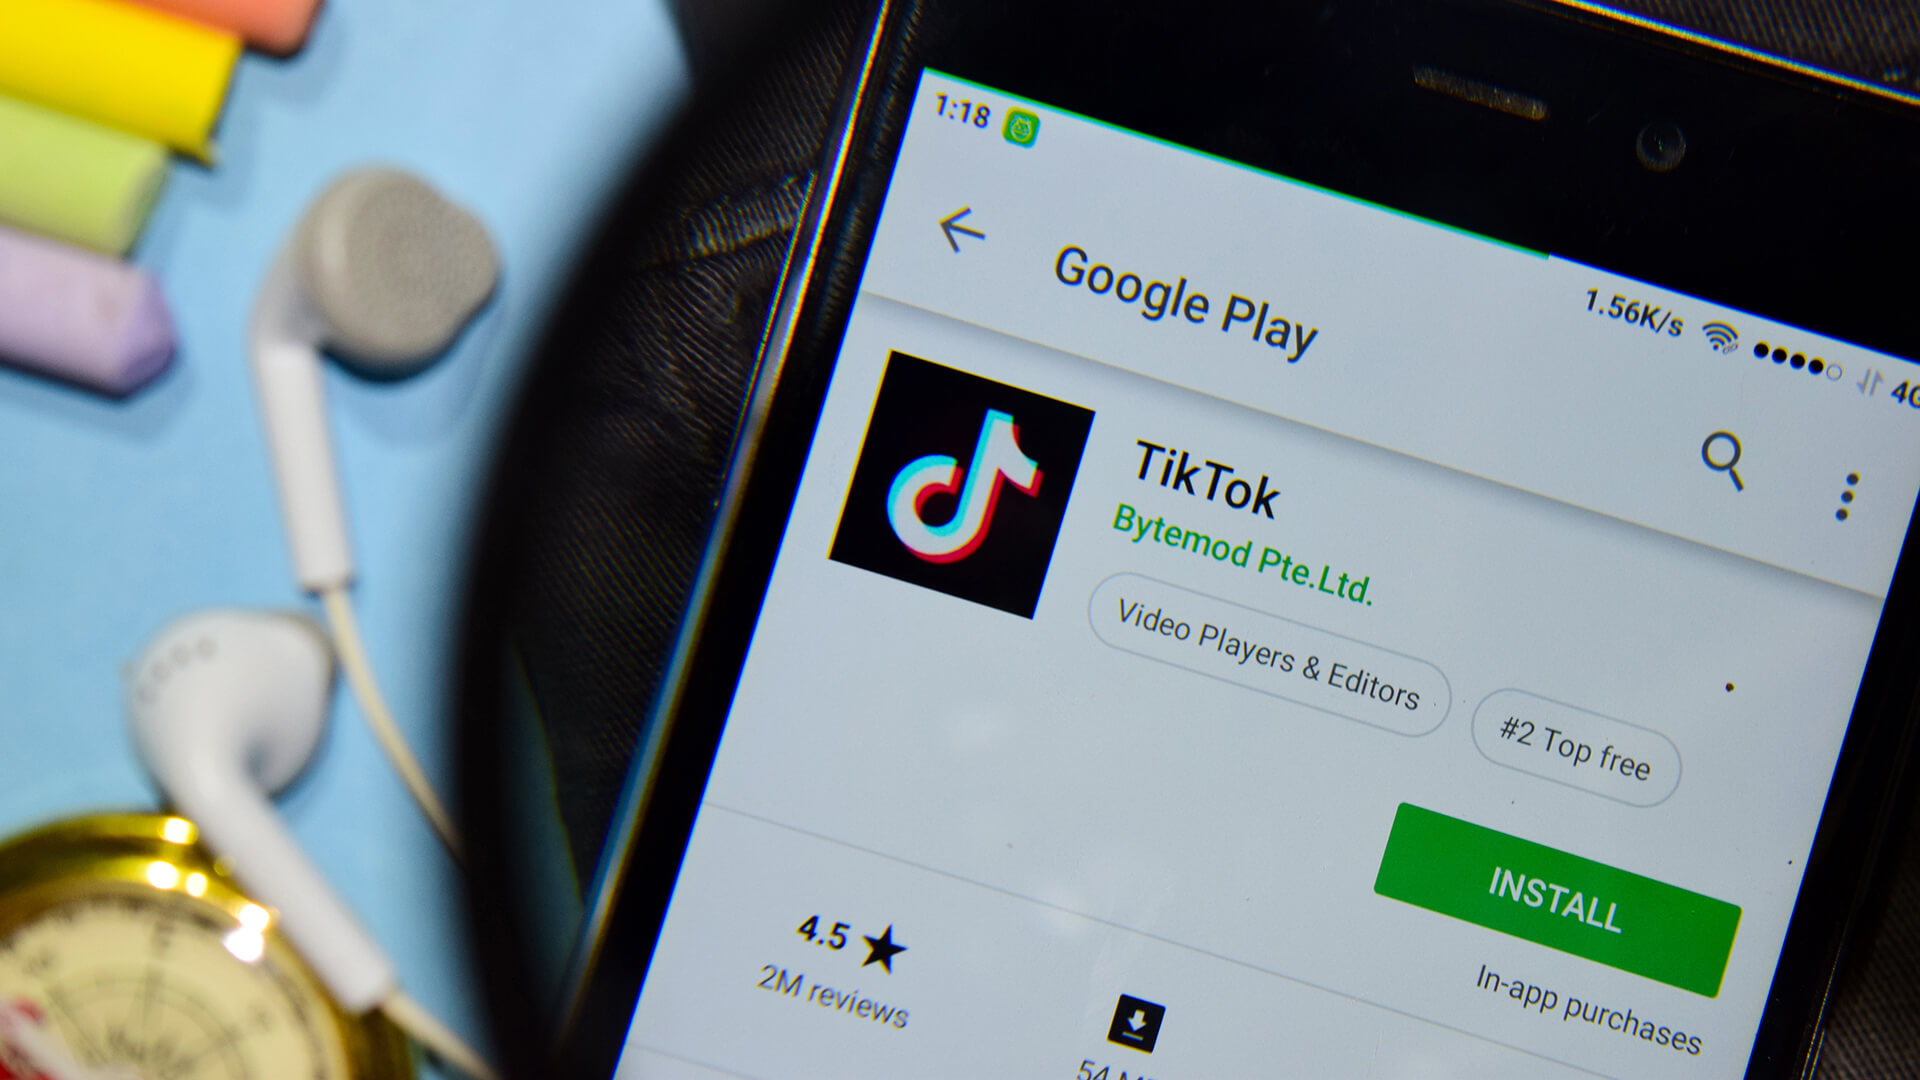 How TikTok and Spotify could win through location-based marketing